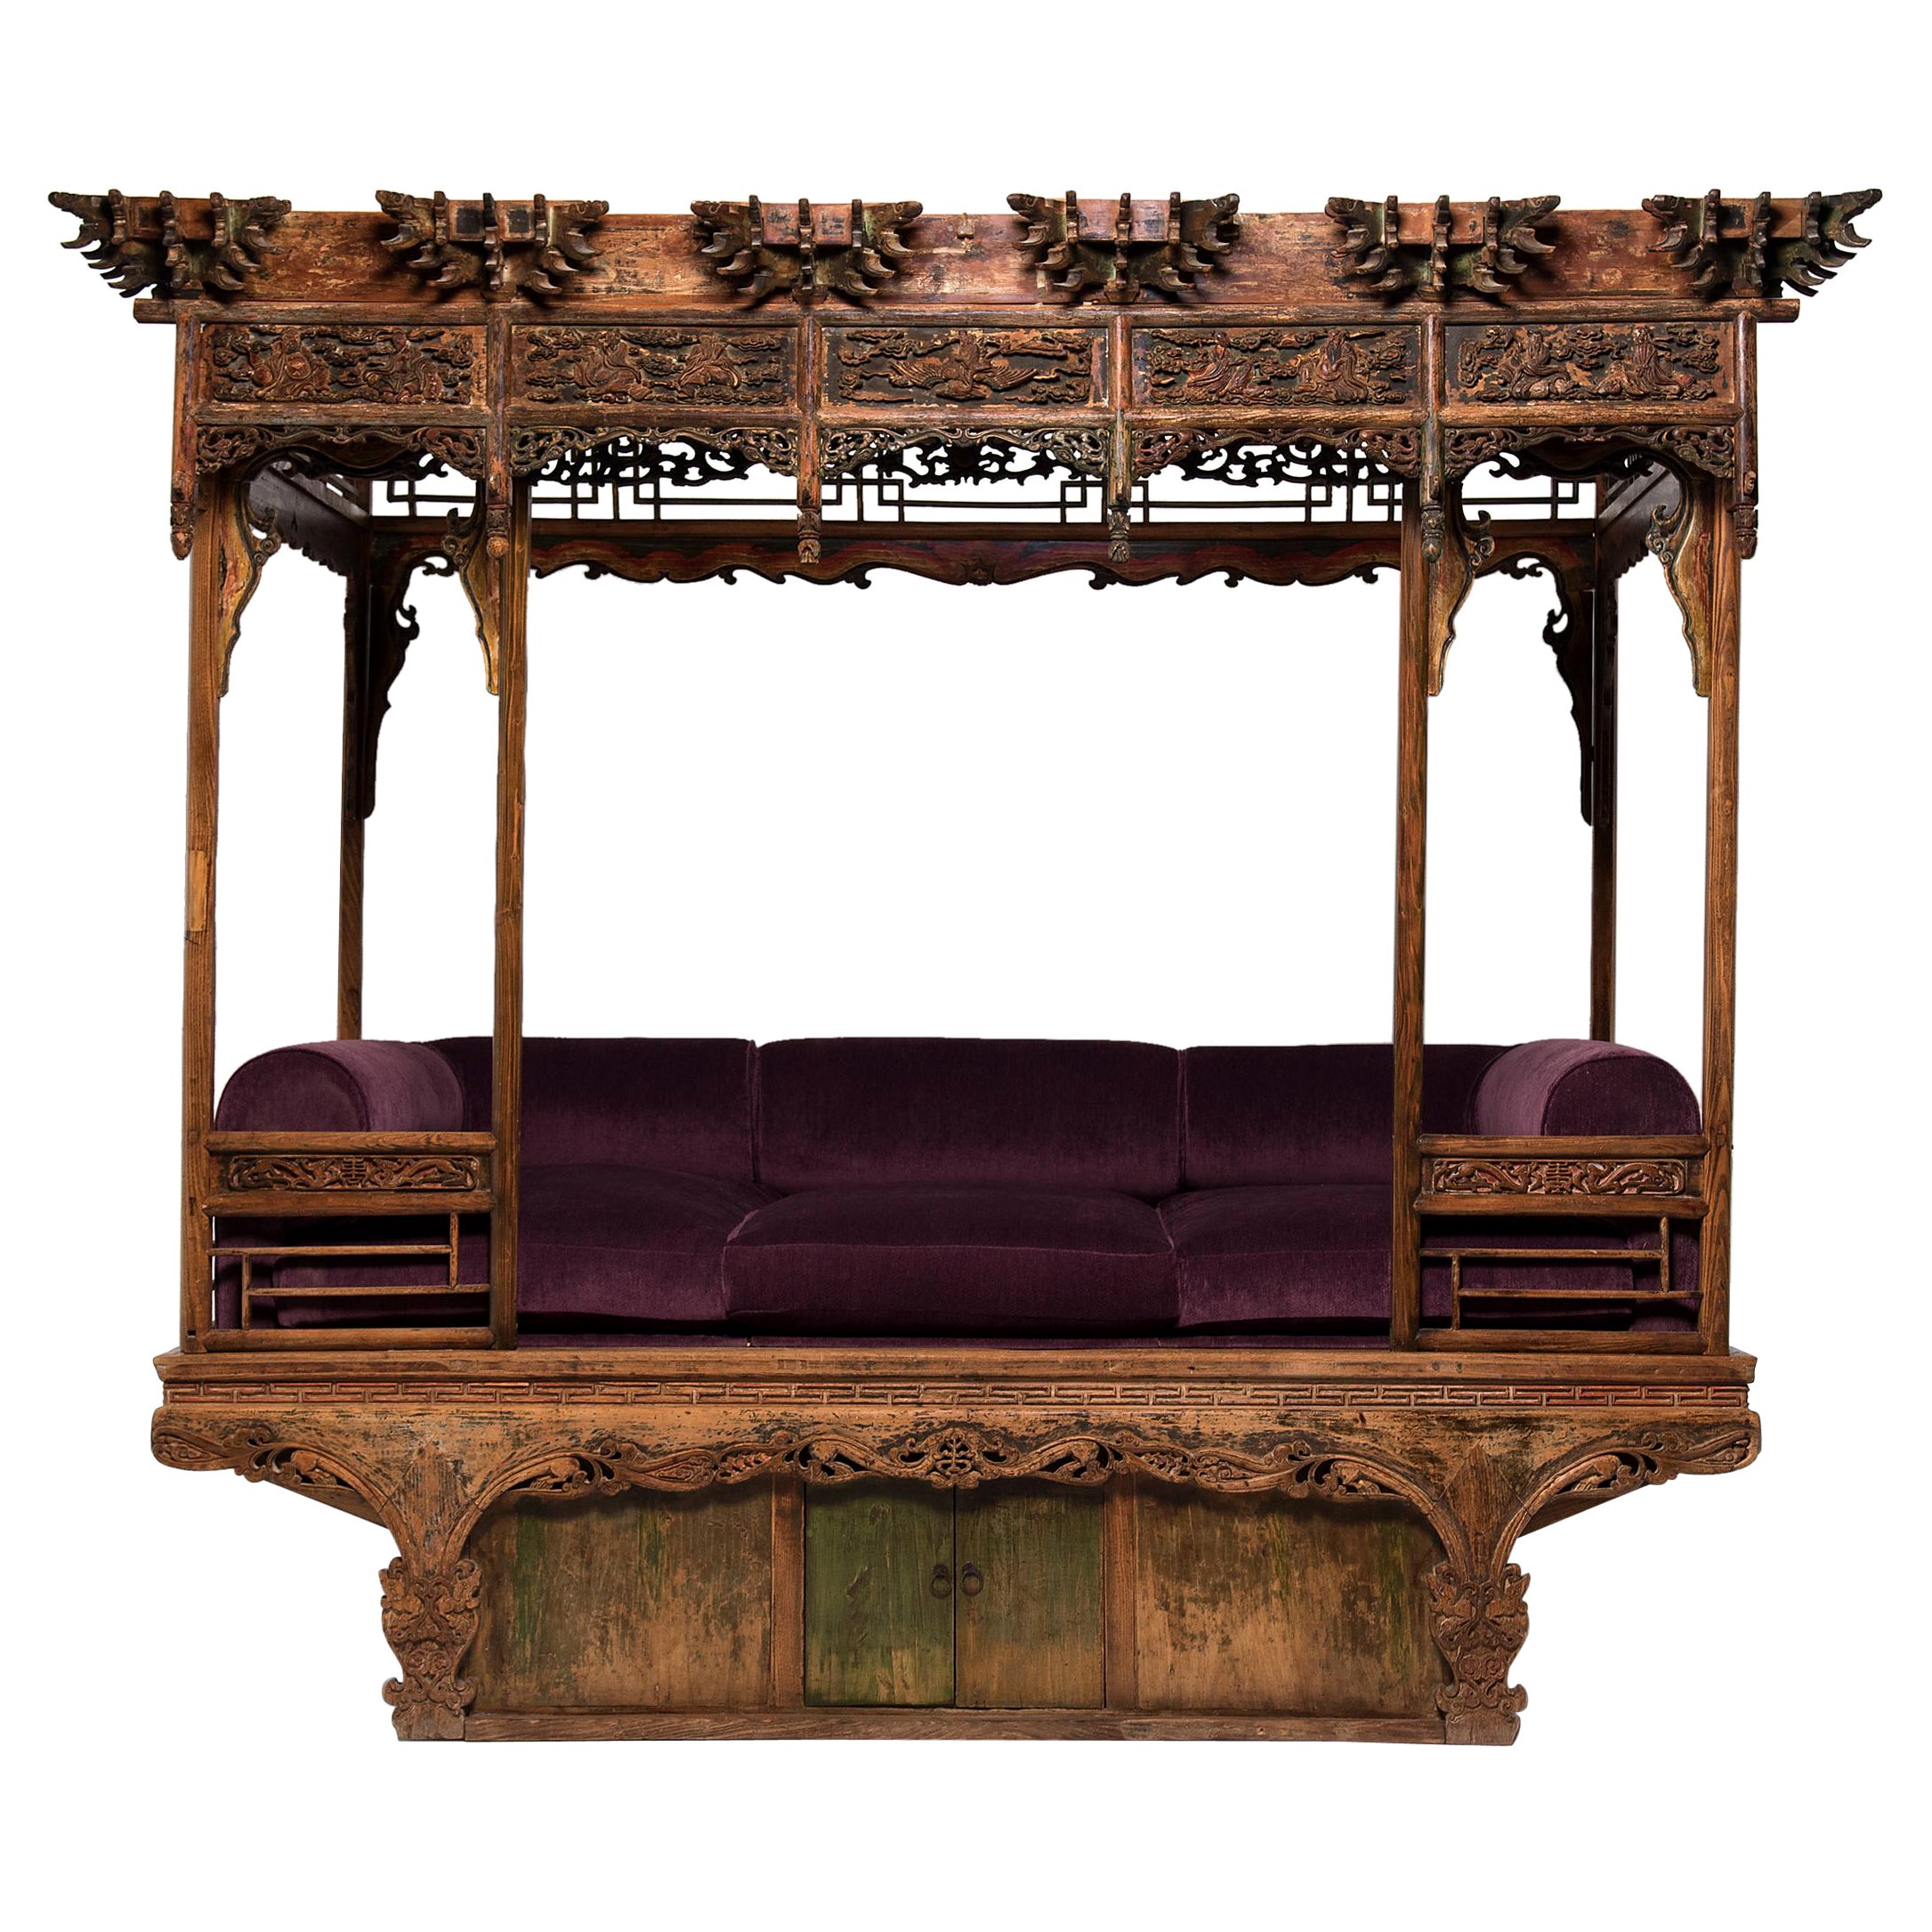 Ornate Chinese Canopy Bed, c. 1750